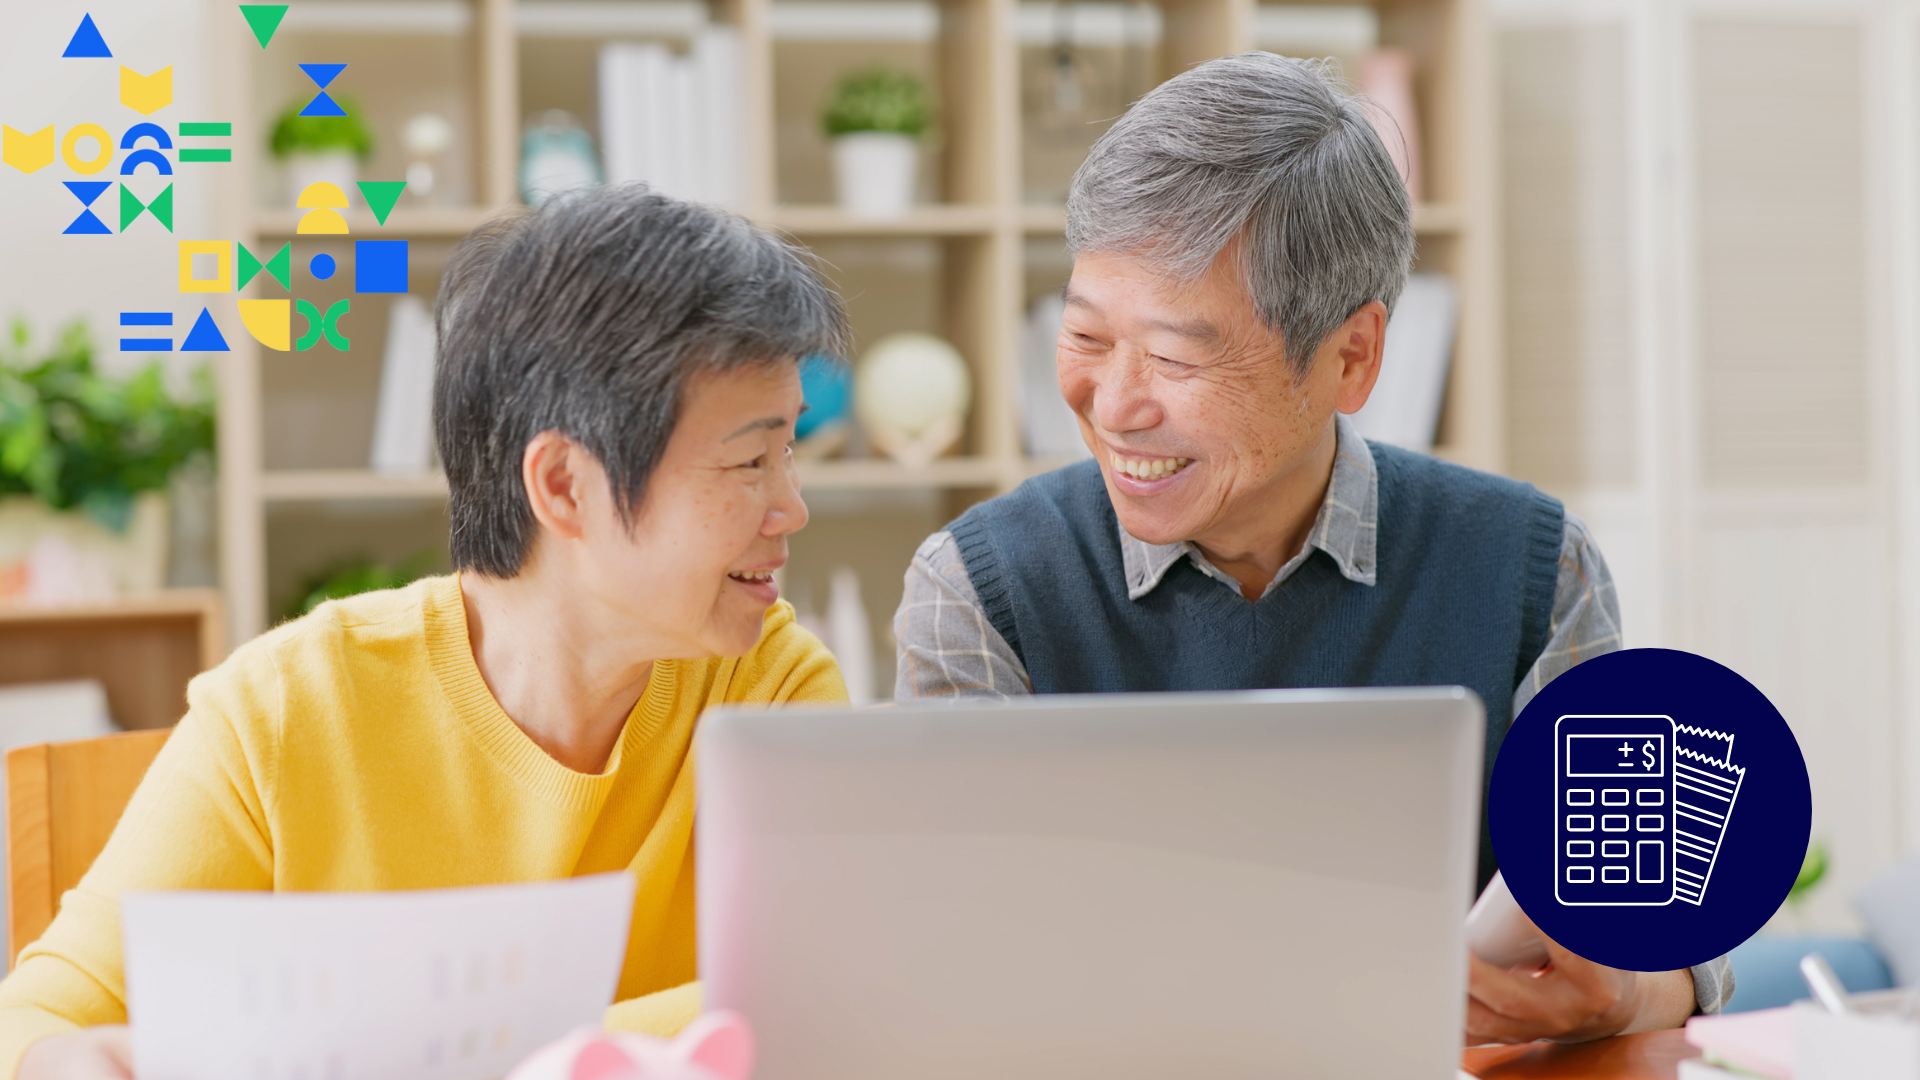 Image of an elderly Asian couple reviewing a document and laptop together, smiling. There is an icon of a calculator and receipt on top. This represents a couple living on a fixed income.